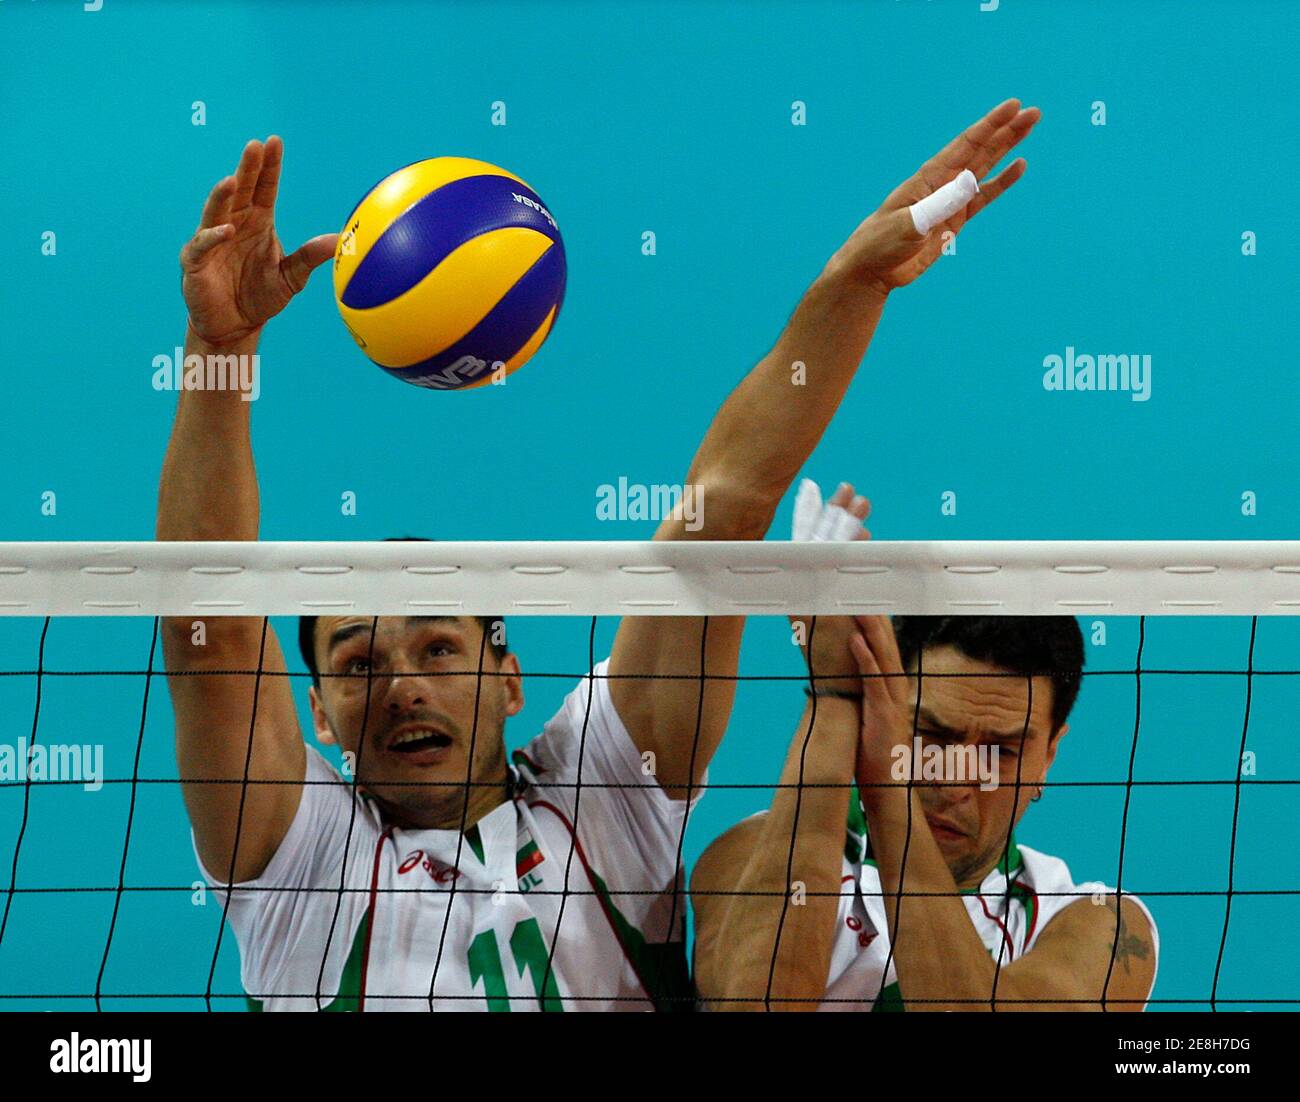 Vladimir Nikolov (L) and Evgeni Ivanov of Bulgaria attempt a block during their men's preliminary Pool A volleyball match against Venezuela at the Beijing 2008 Olympic Games August 18, 2008.     REUTERS/Oleg Popov (CHINA) Stock Photo